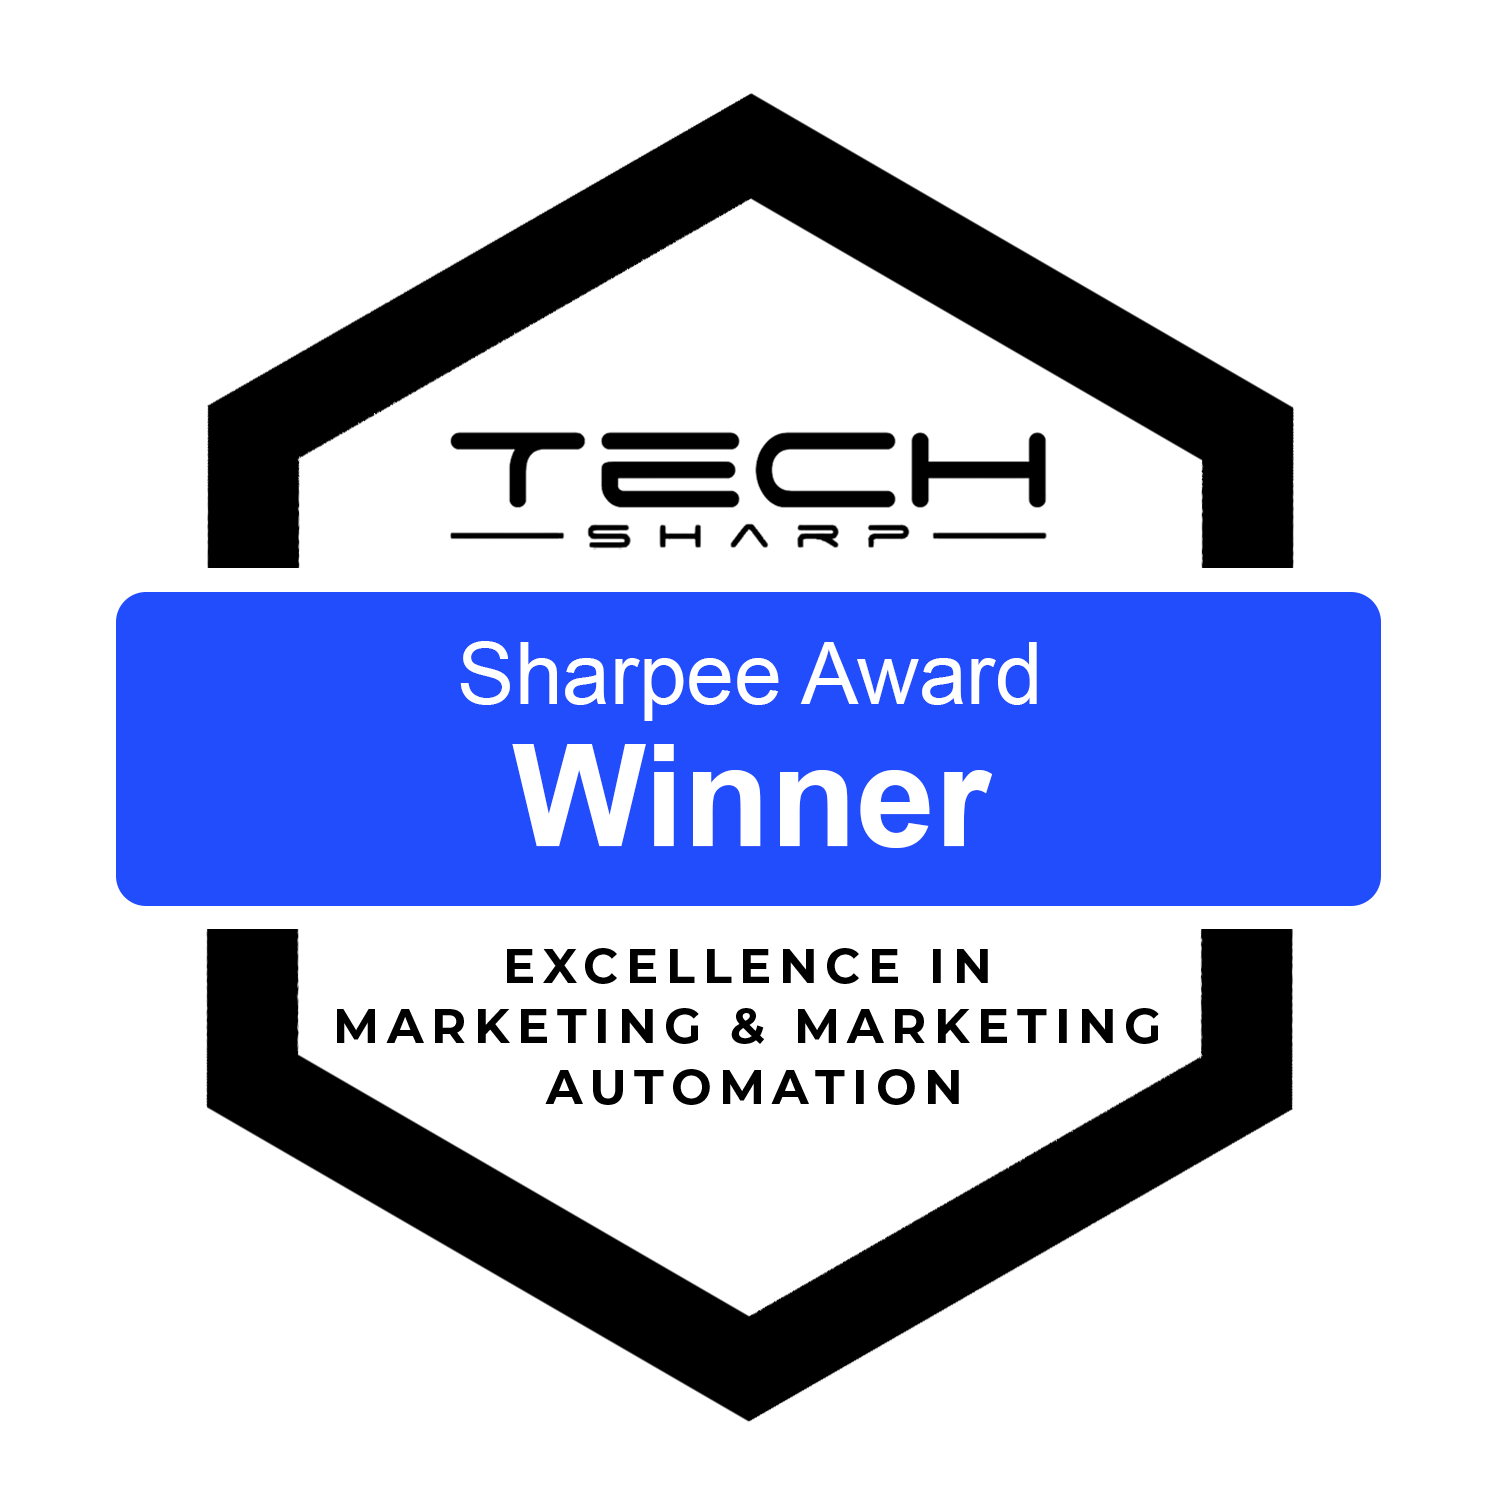 La agencia Cleverman Inc. de New York, United States gana el premio Sharpee Award for Excellence in Business Process Automation & Marketing